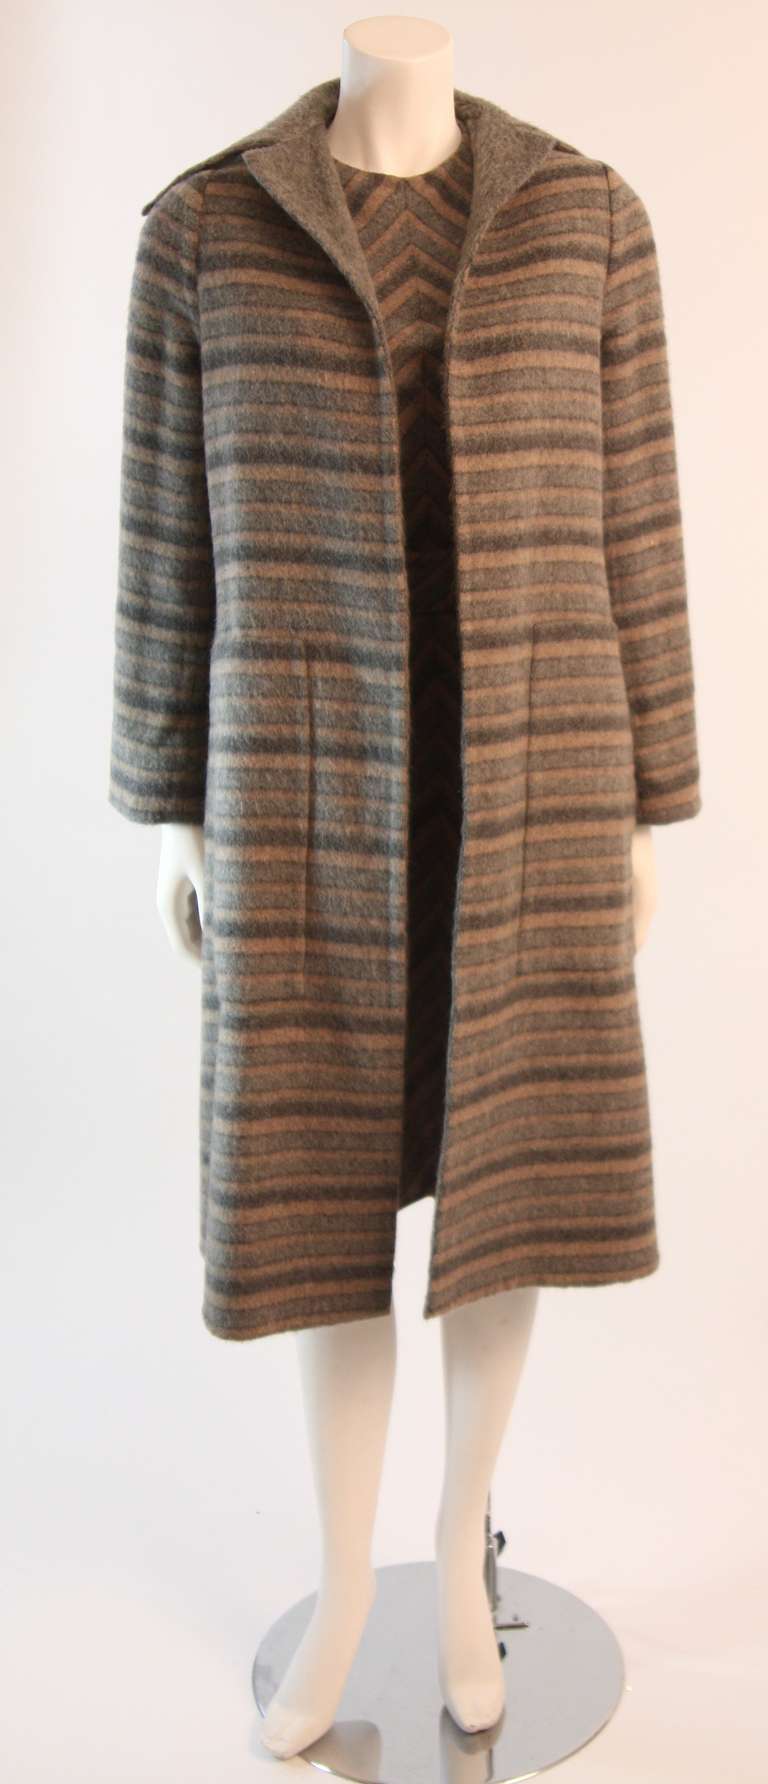 Pauline Trigere Wonderful 3 Piece Reversible Coat with Dress Set  Size Small In Excellent Condition For Sale In Los Angeles, CA